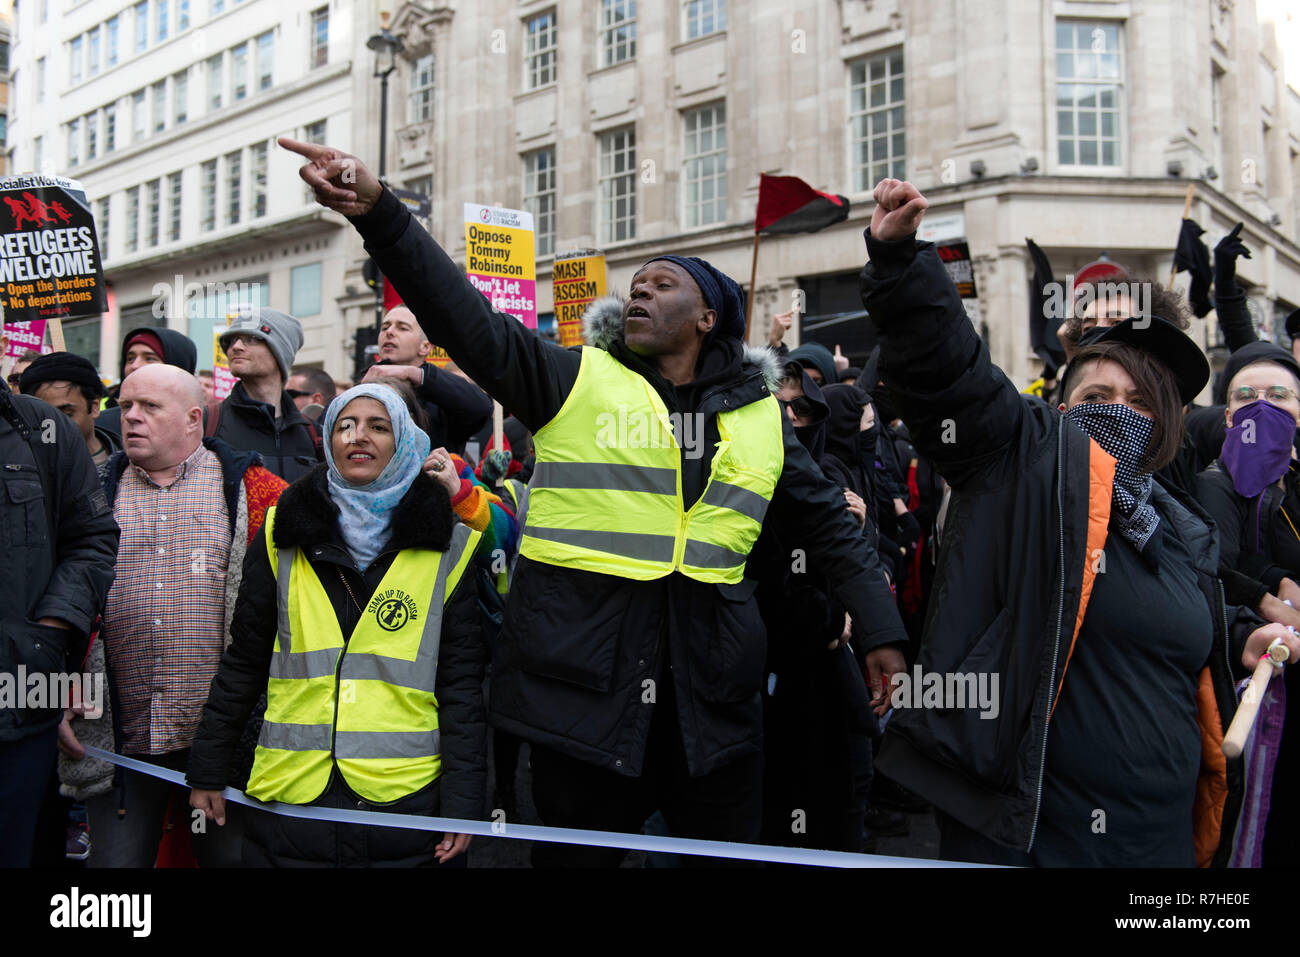 Protesters seen shouting slogans against to a few Tommy Robinson supporters that were close to the march during a demonstration against the 'Brexit Betrayal March'.  Thousands of people took to the streets in central London to march against the 'Brexit Betrayal March' organised by Tommy Robinson and UKIP. Counter Protesters made their way from Portland Place to Whitehall, where speakers addressed the crowd. During the counter demonstration, there was a strong police presence. A group of counter protesters, who became separated from the main protest, were corralled by police to avoid an encount Stock Photo